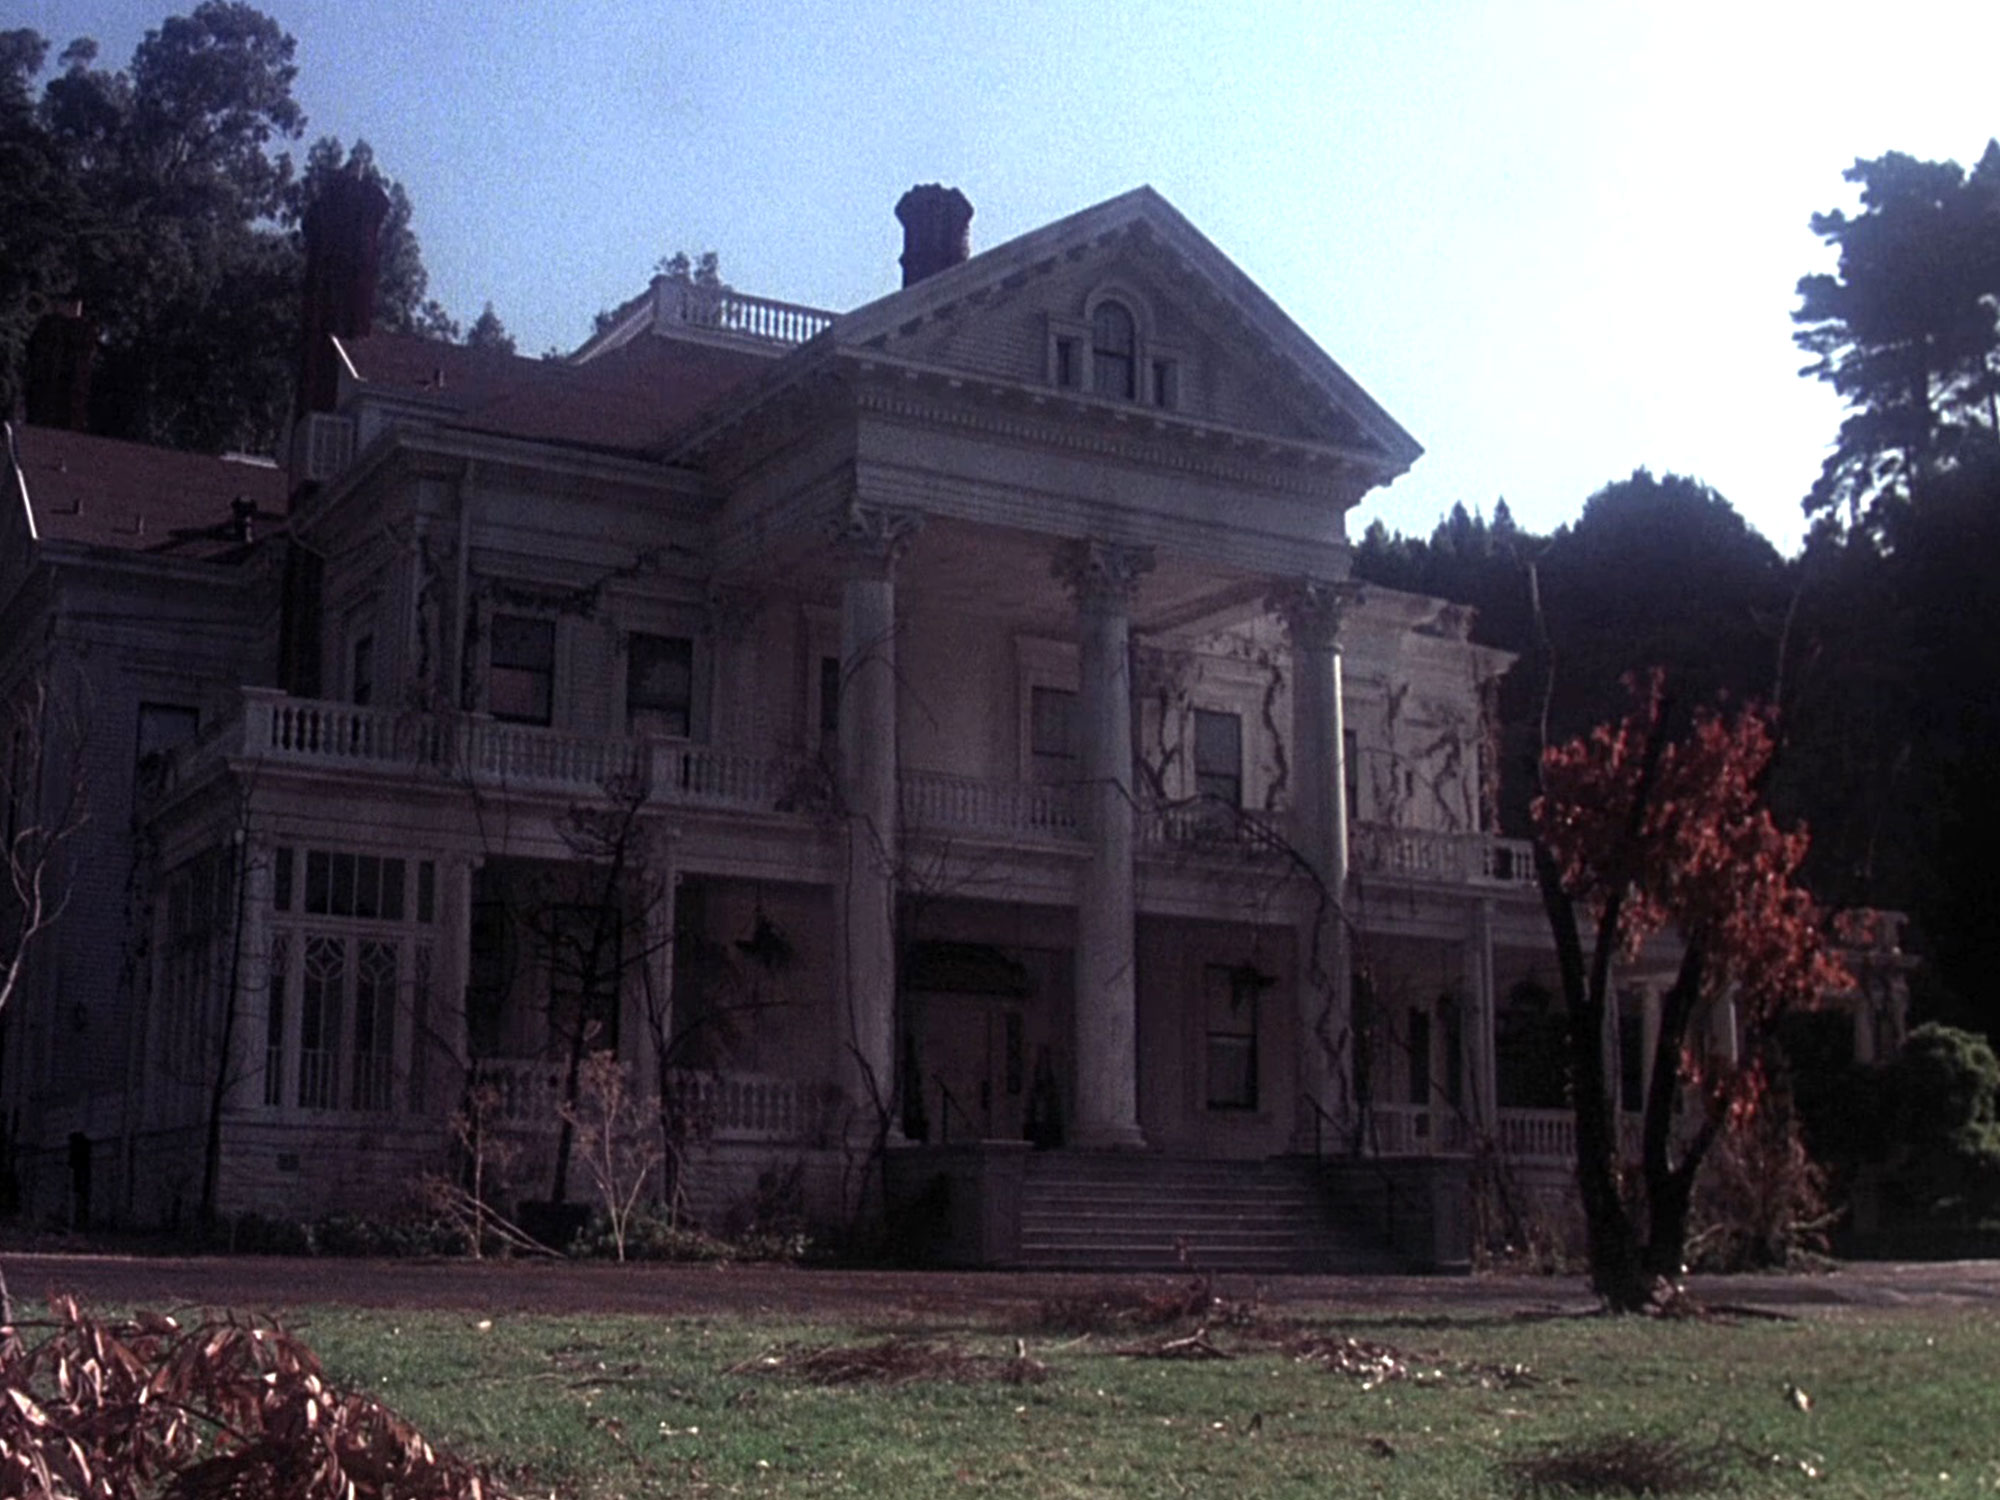 The '70s haunted house movie that’s spookily similar to The Shining.